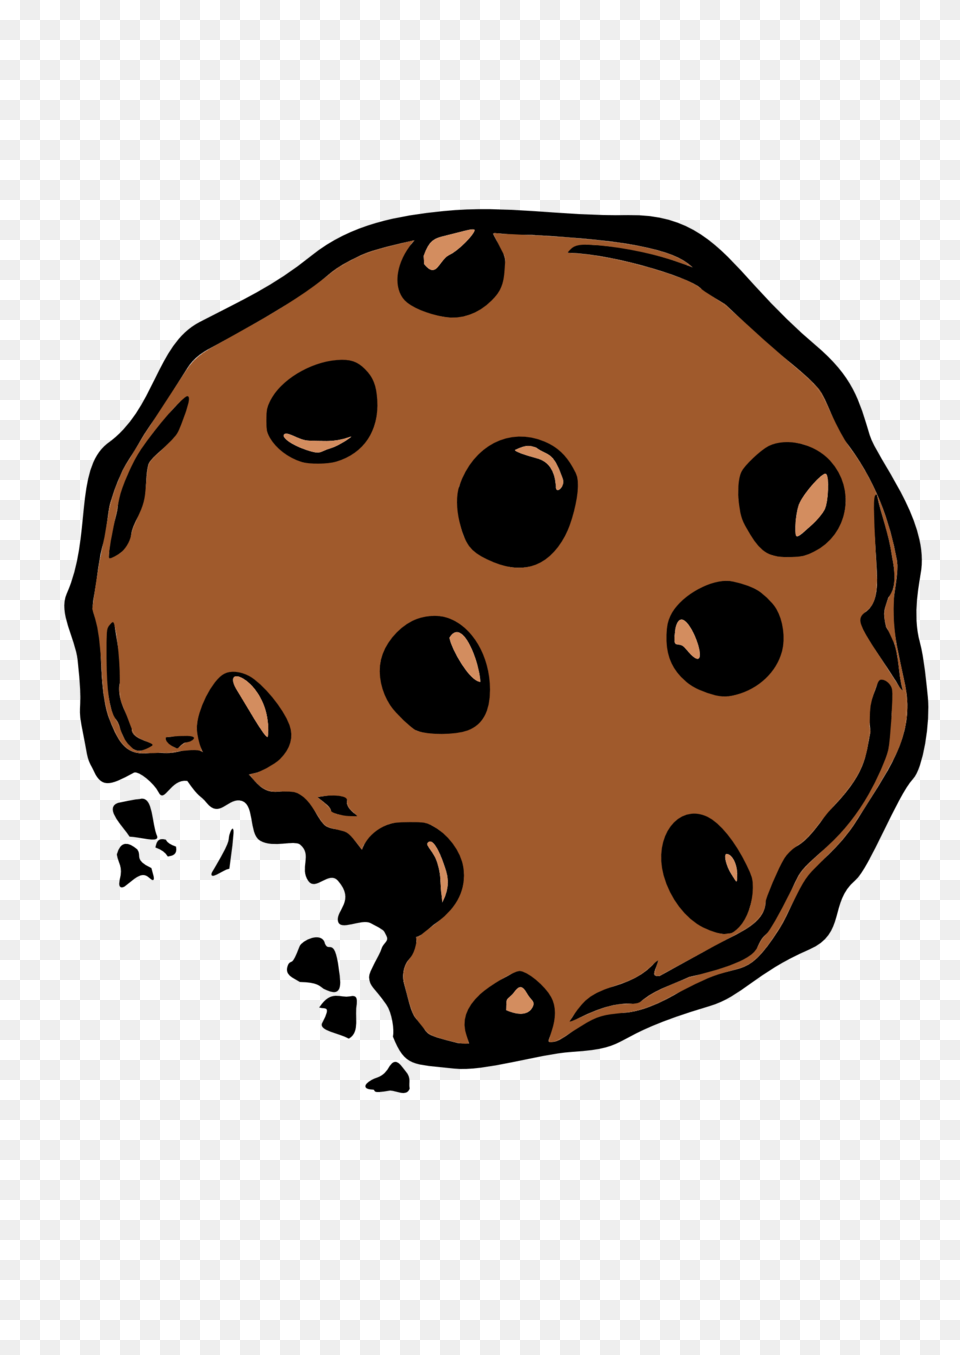 Bite Mark Cartoon Cookies, Cookie, Food, Sweets, Face Free Transparent Png